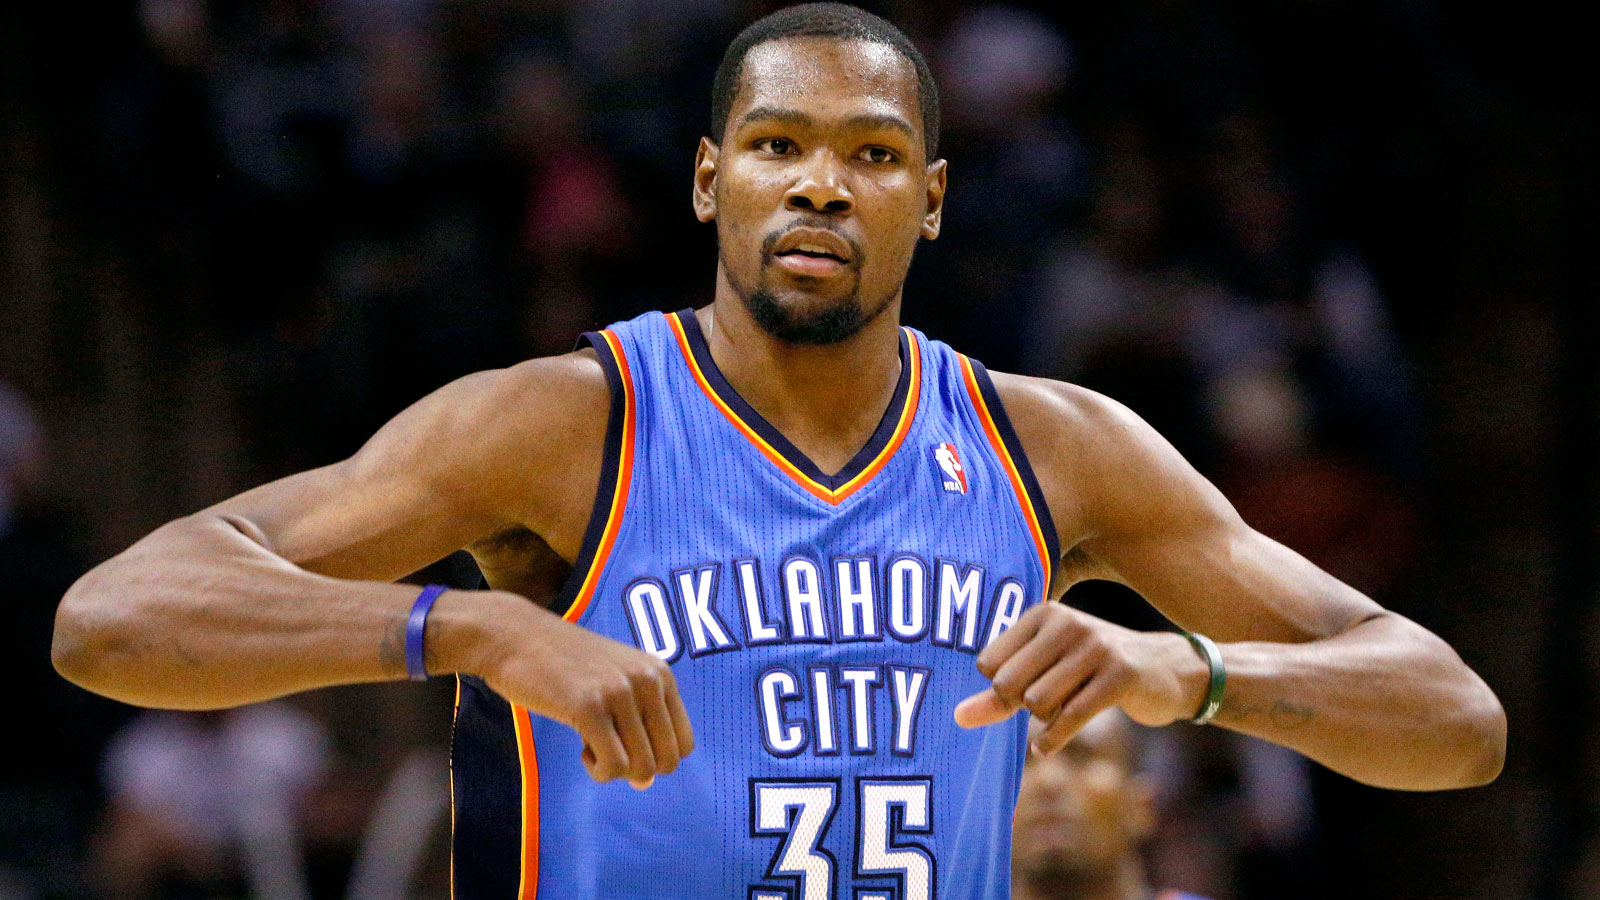 OKC Thunder's Offense Needs Massive Overhaul Without Kevin Durant